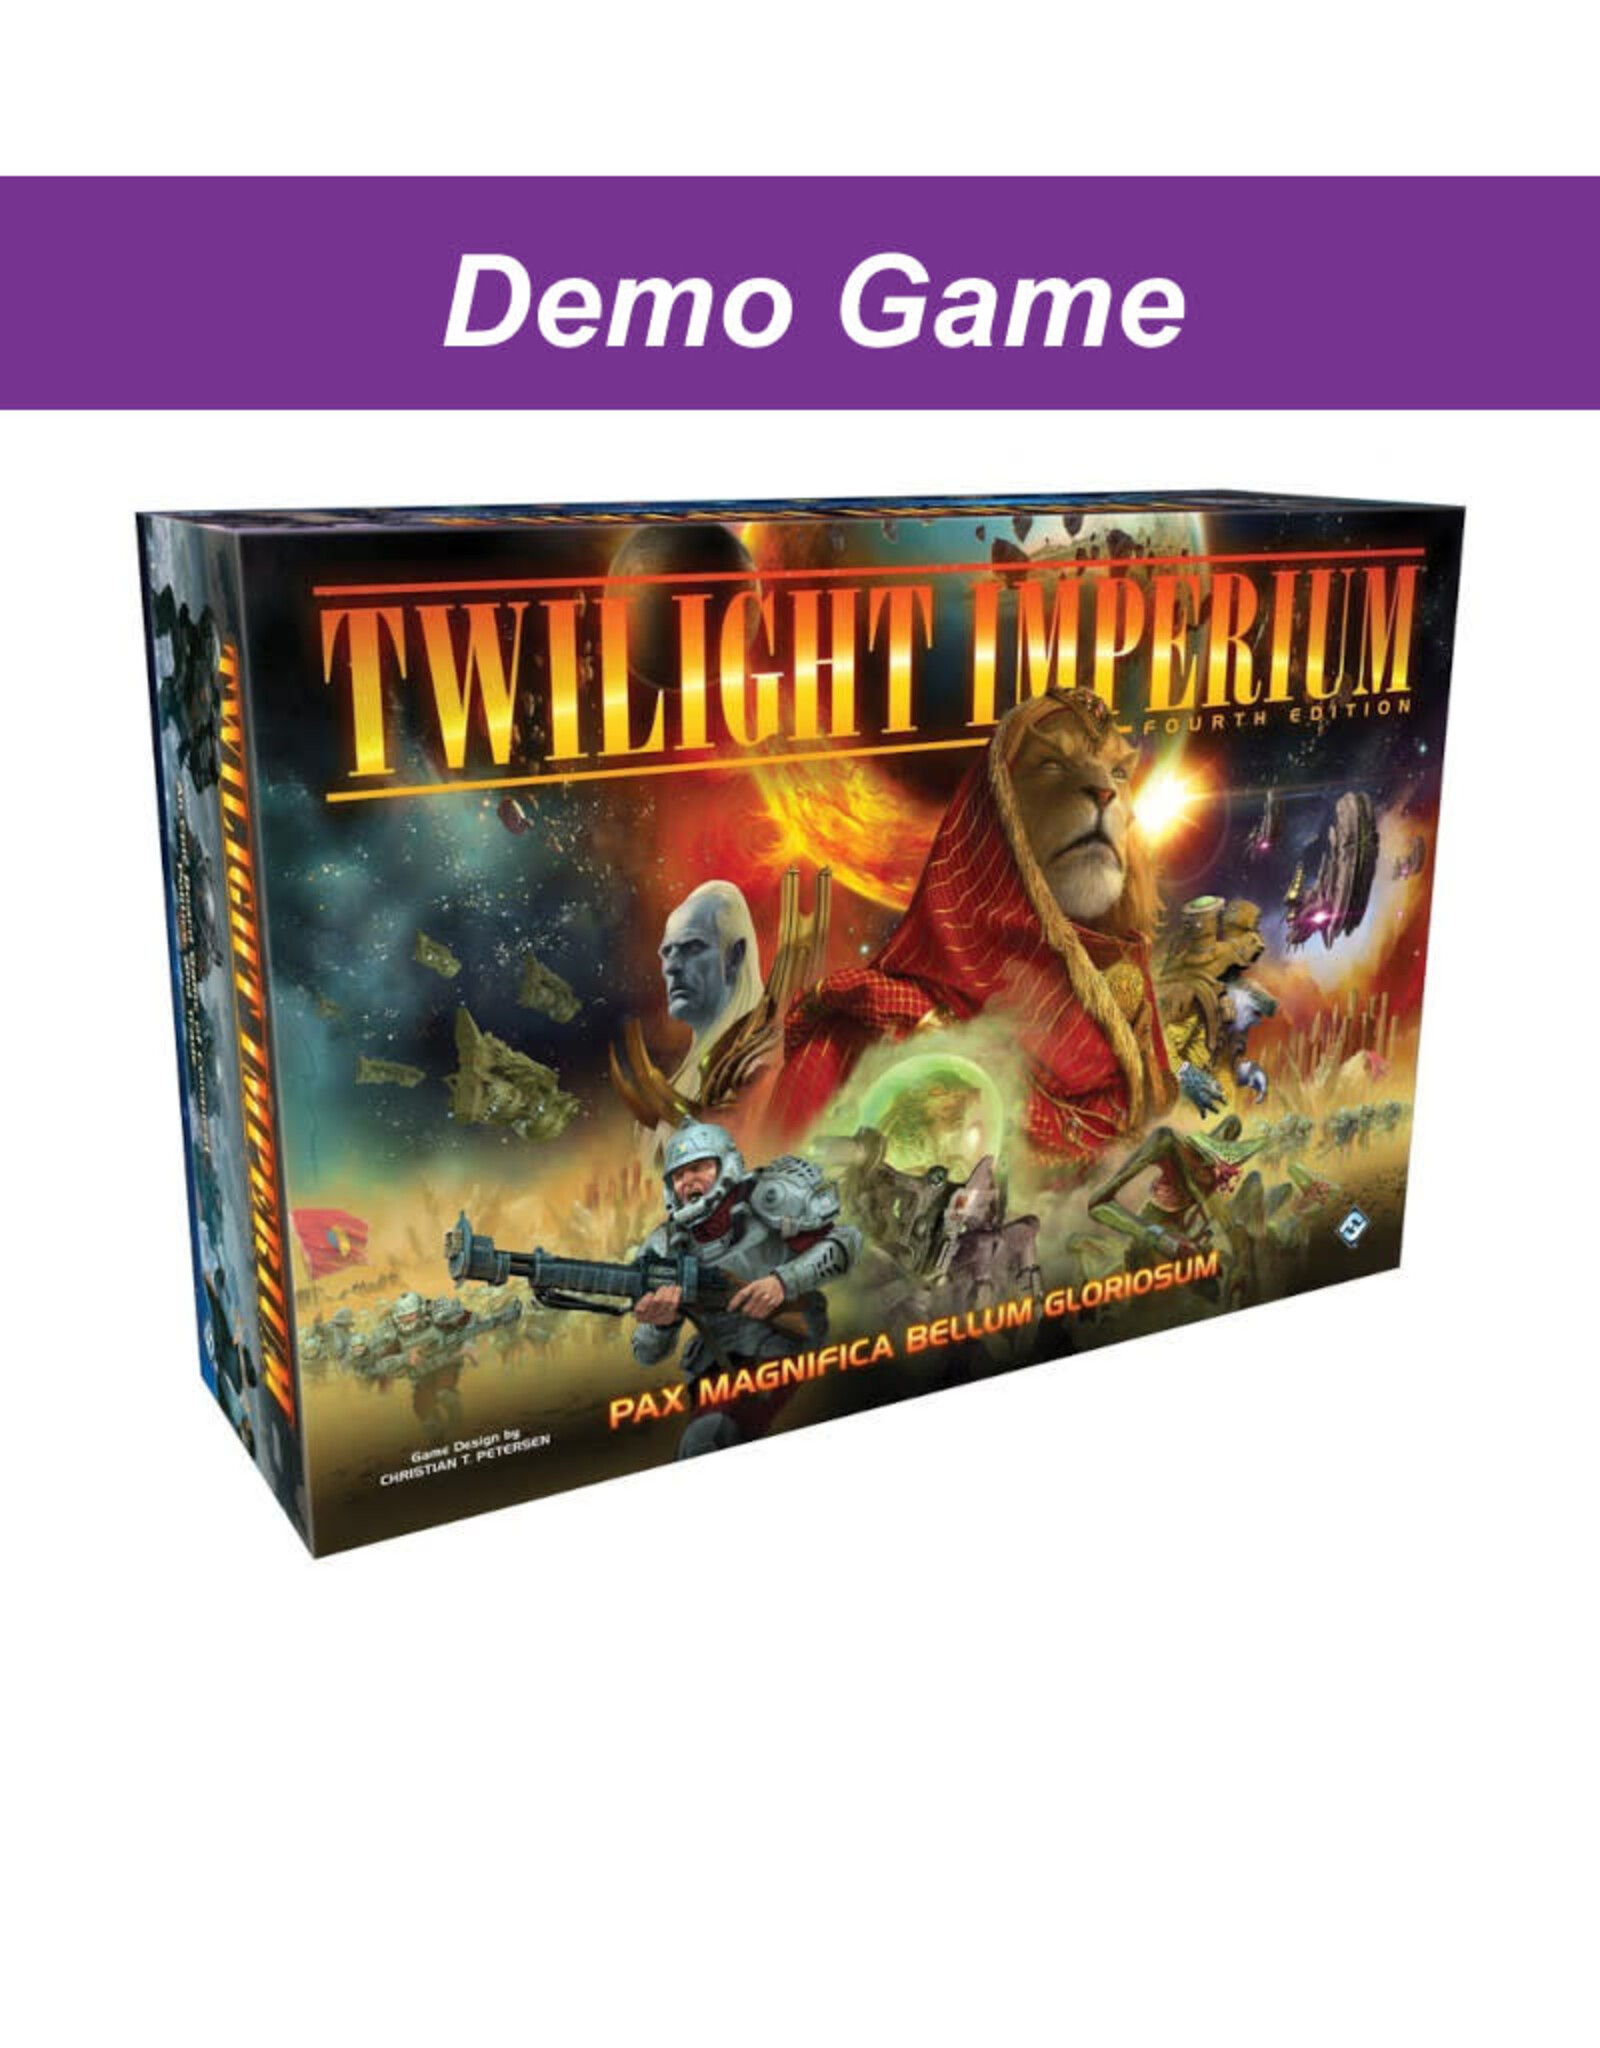 Fantasy Flight Games (DEMO) Twilight Imperium. Free to Play In Store!